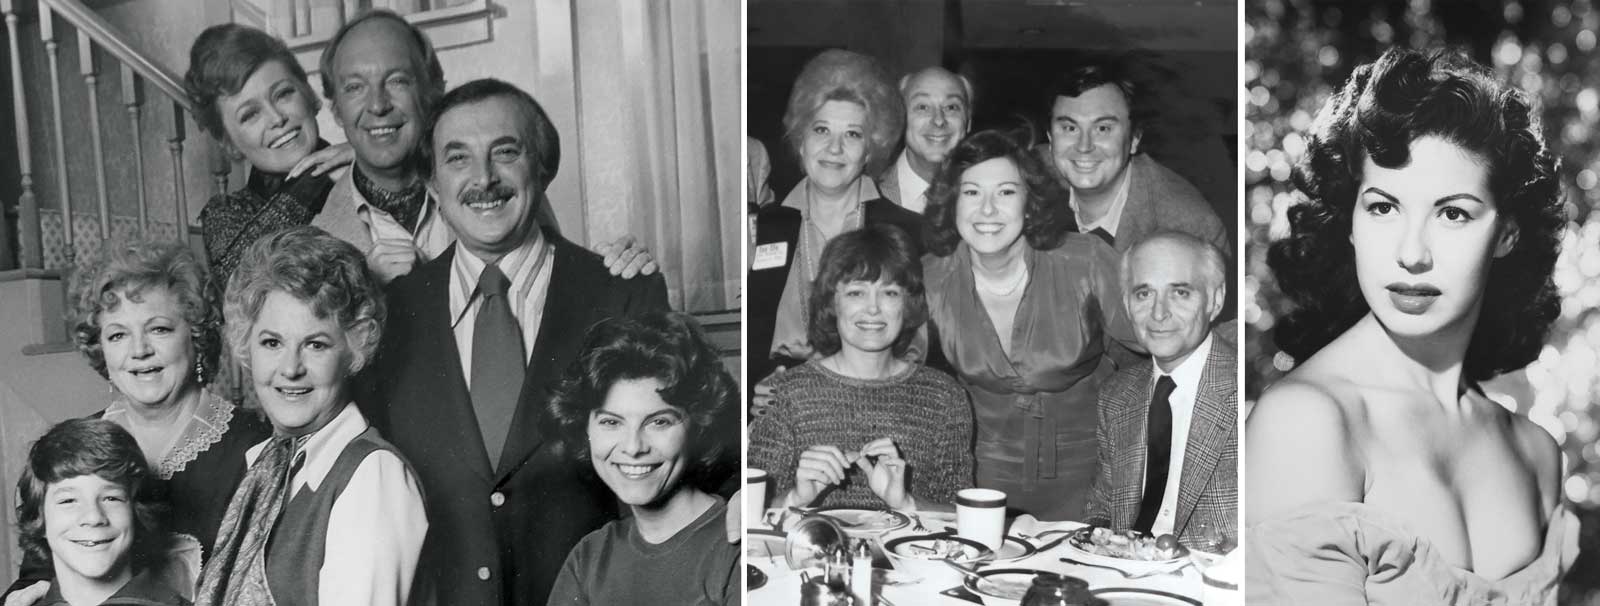 The cast of Maude including Bea Arthur, Bill Macy, Conrad Bain; Cast including Rue McClanahan with Fern Field and Norman Lear; Fern Field